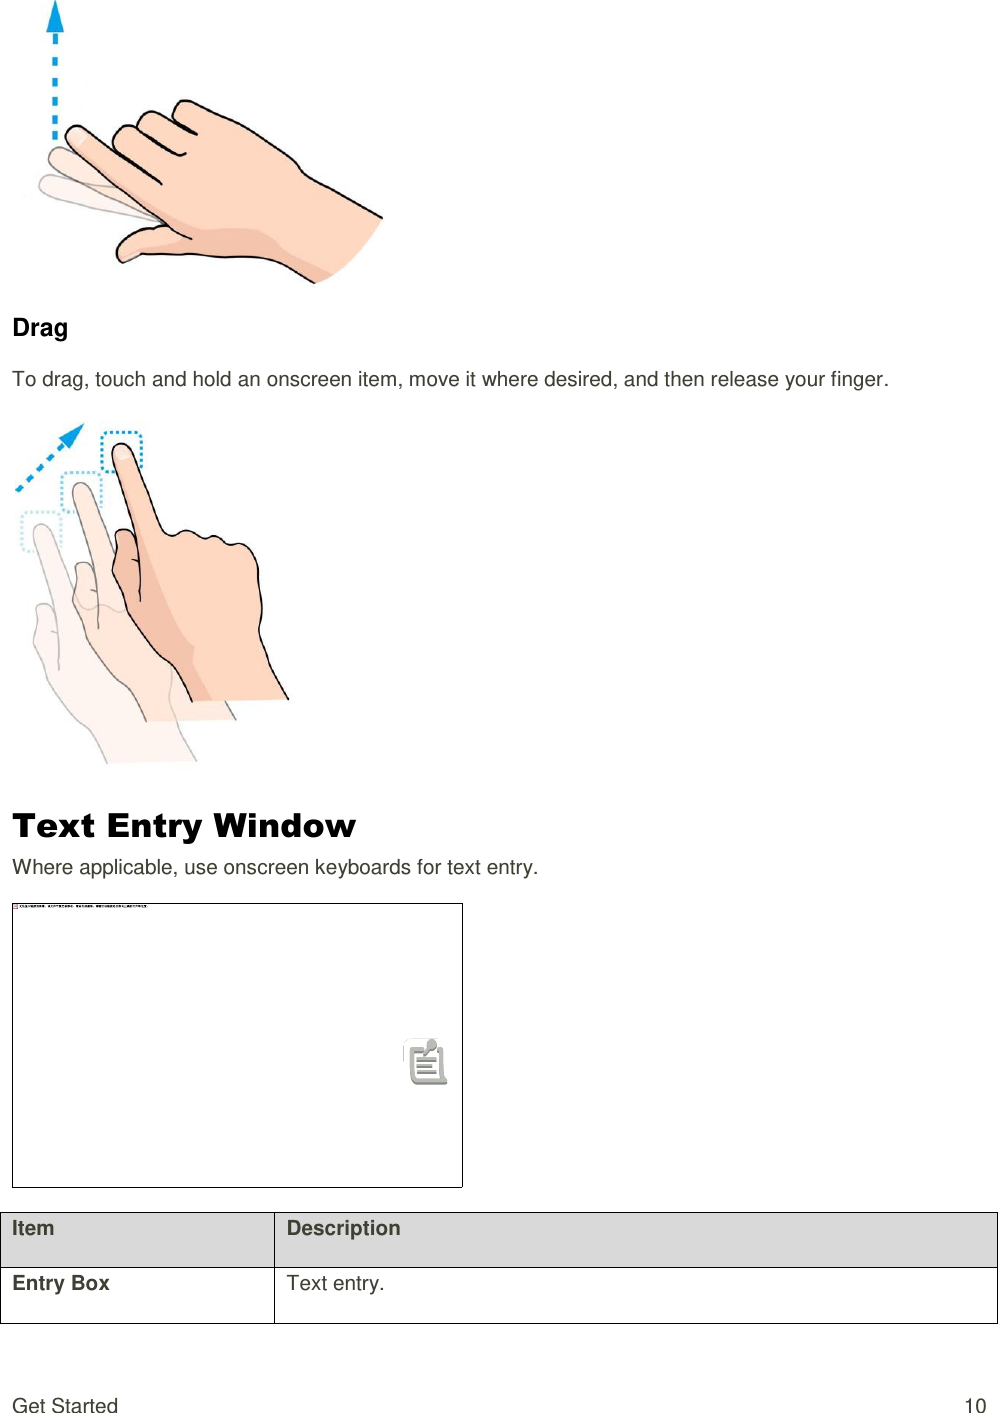 Get Started  10  Drag To drag, touch and hold an onscreen item, move it where desired, and then release your finger.    Text Entry Window Where applicable, use onscreen keyboards for text entry.  Item Description Entry Box Text entry. 